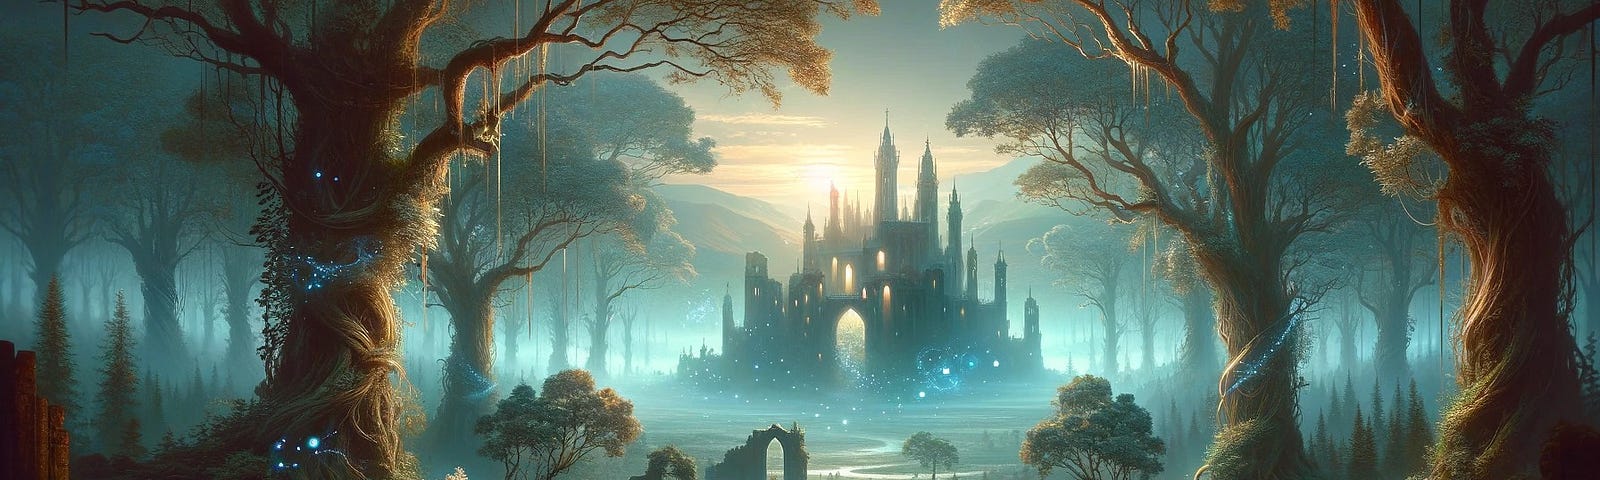 A landscape image of a mystical realm where magic is practiced in secret. The scene includes a hidden grove, ancient ruins, and a mysterious forest with subtle magical glimmers, conveying a secretive and enchanting atmosphere.